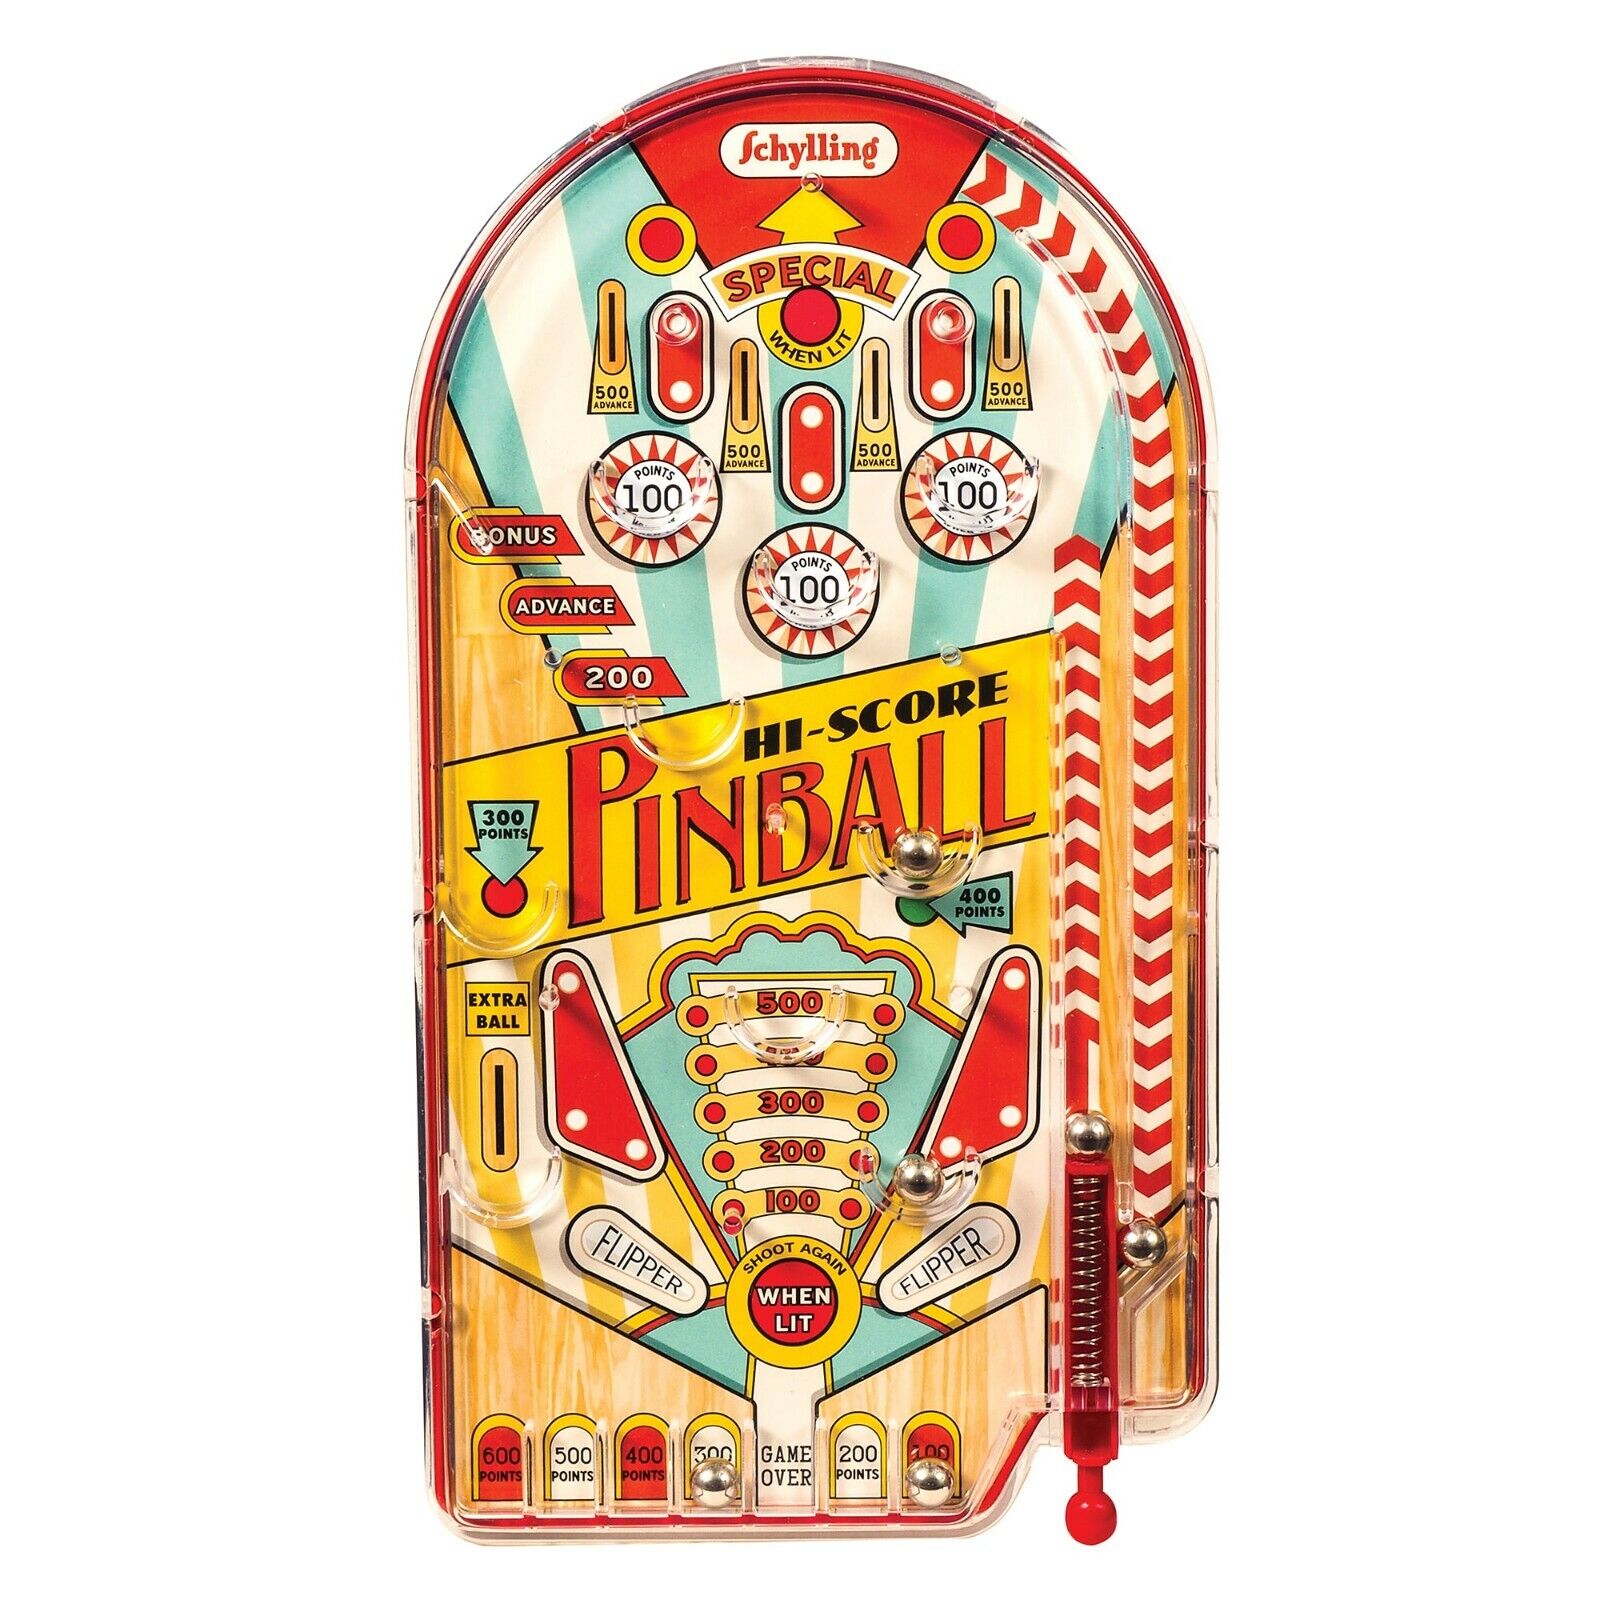 Hi Score Pinball, pull the plunger & shoot 6 steel balls into the playing field.